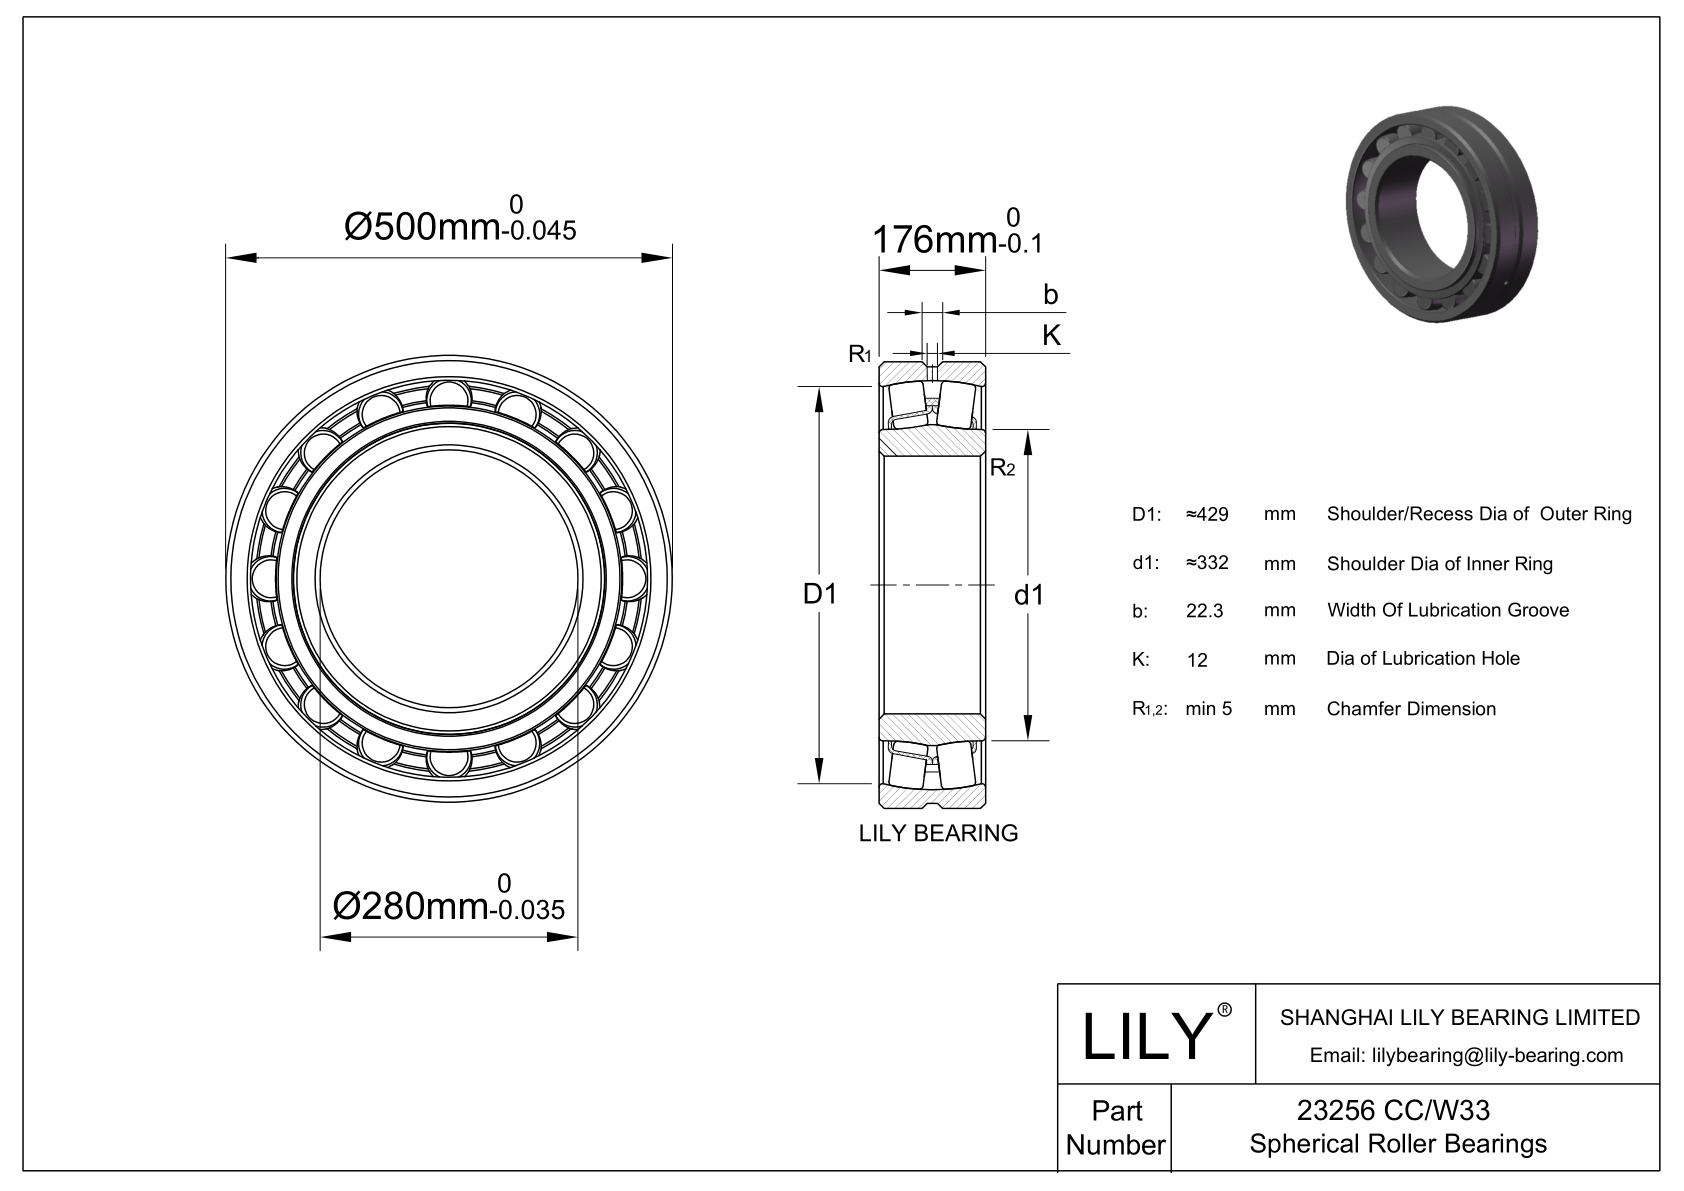 23256 CC/W33 Double Row Spherical Roller Bearing cad drawing